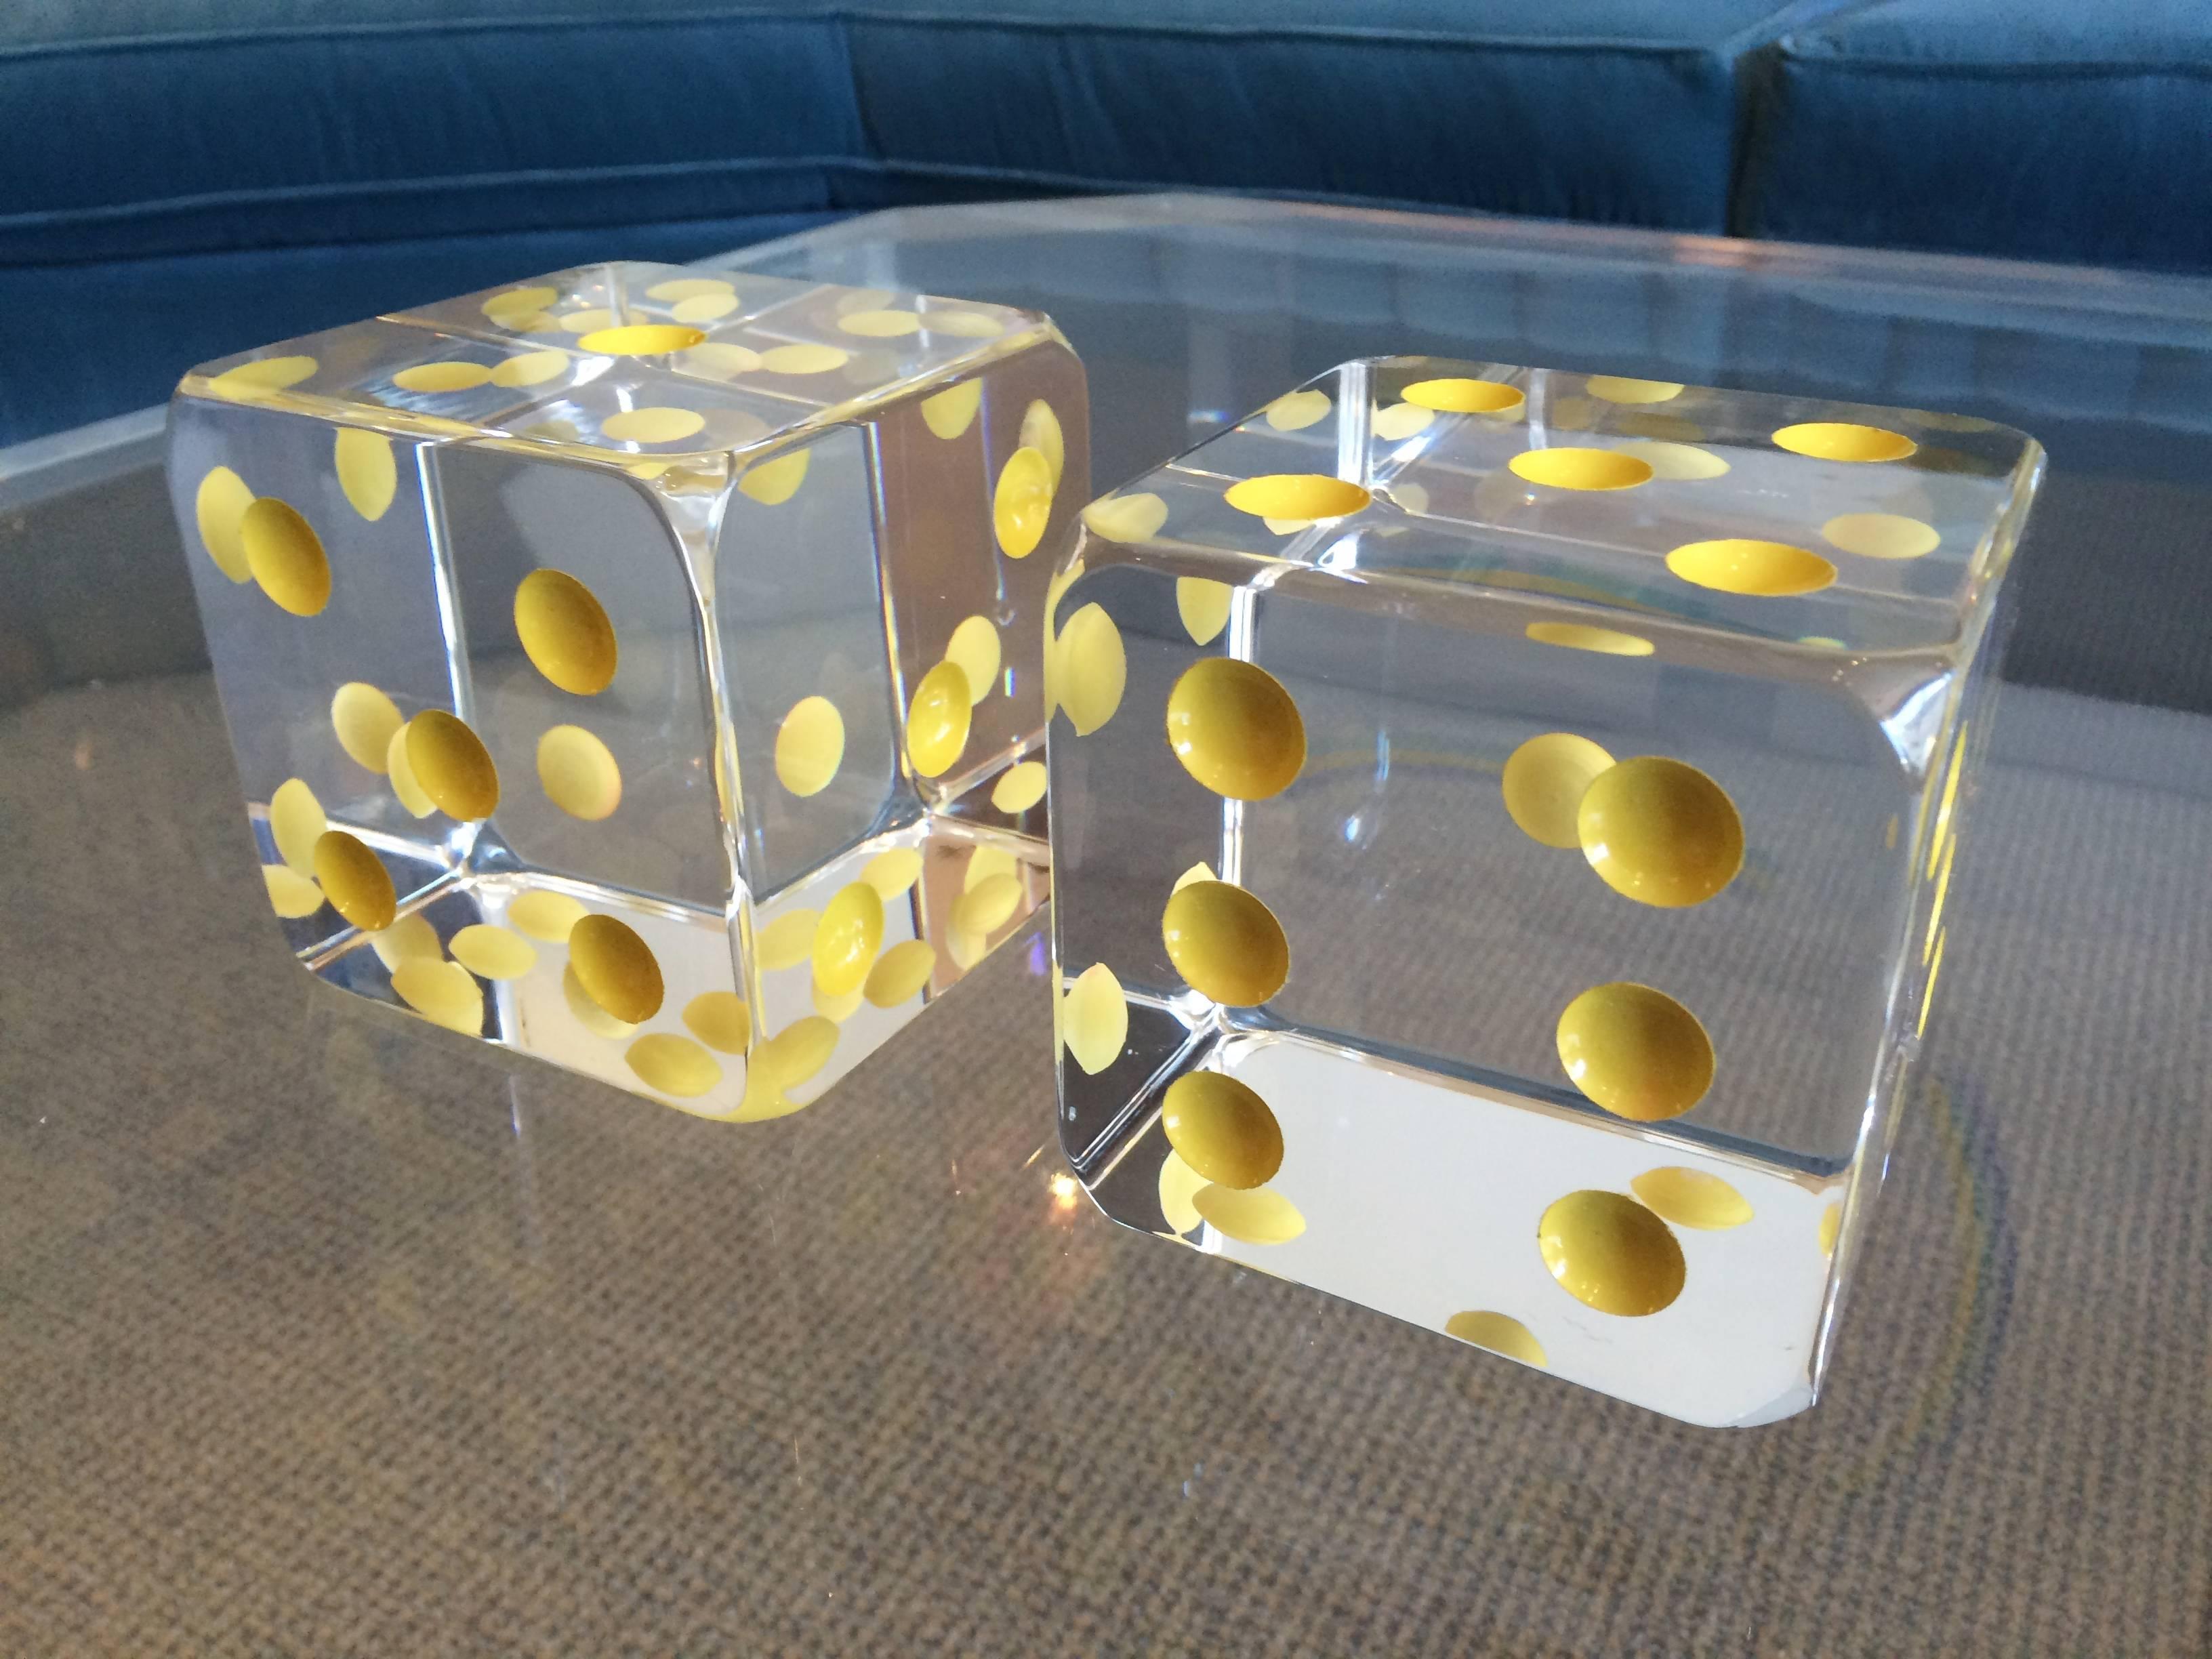 American Oversized Dice Bookends in Lucite by Charles Hollis Jones